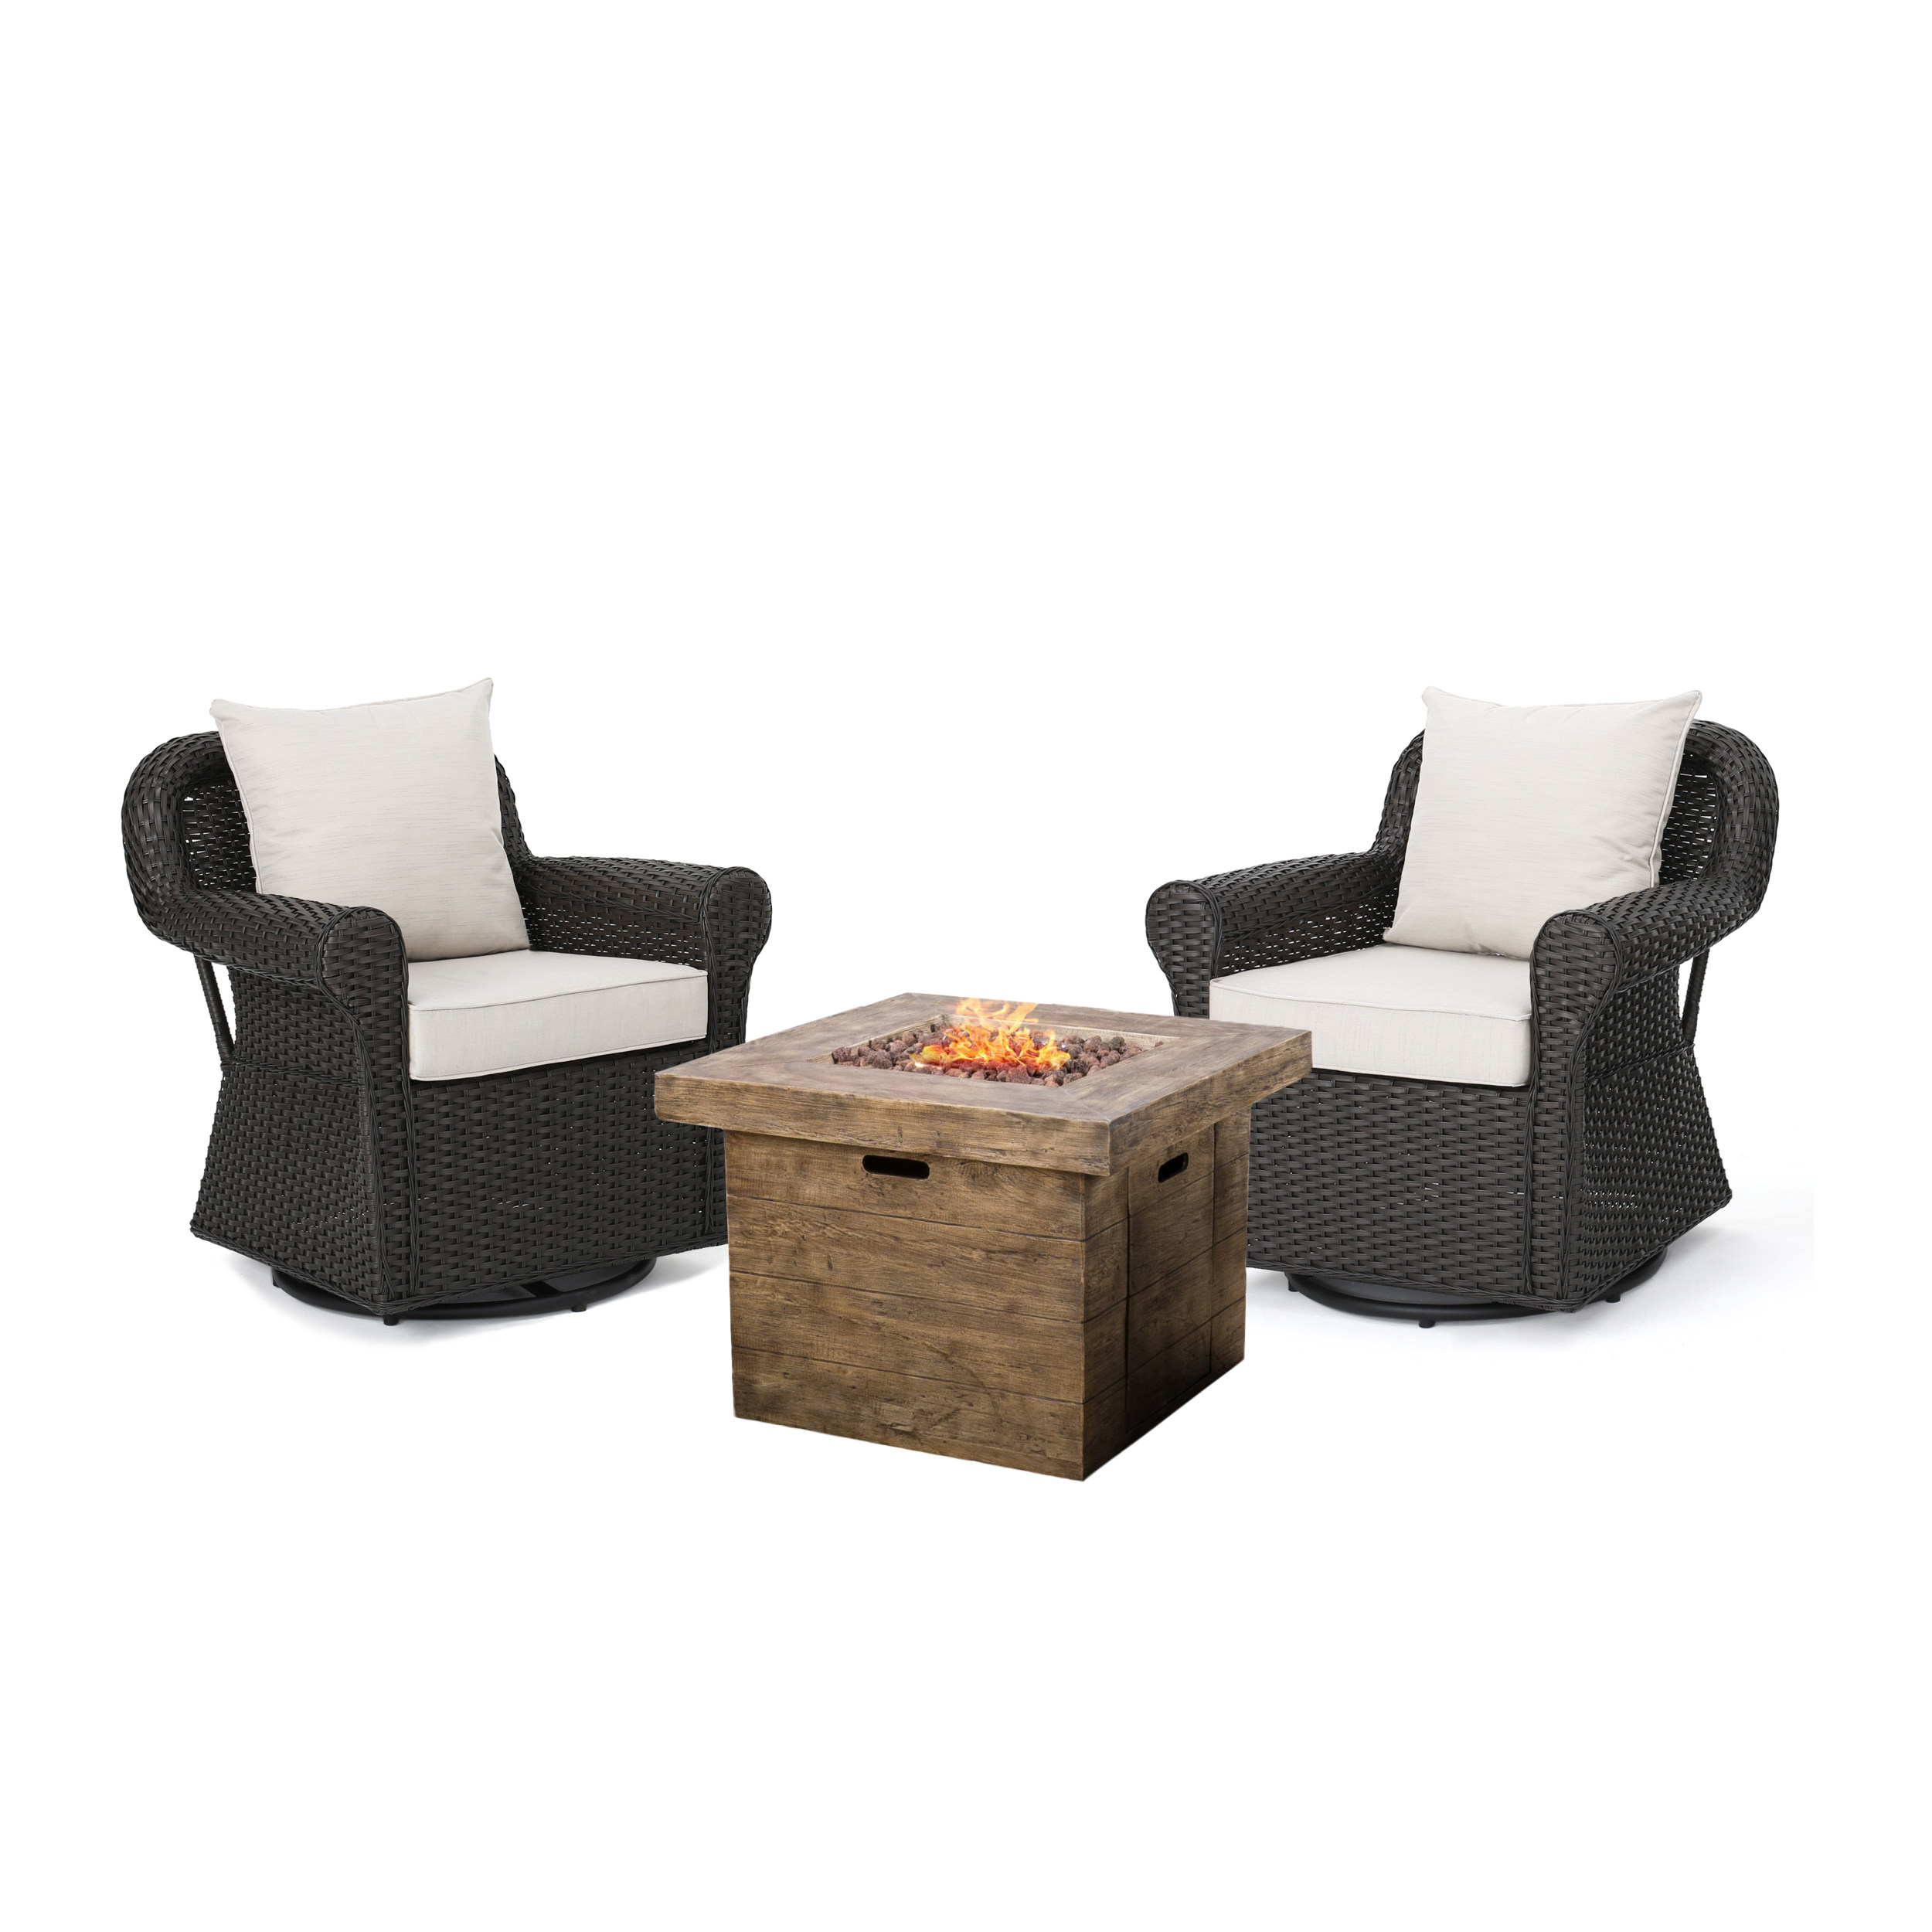 GDF Studio Caldwell Outdoor Wicker Swivel Club Chair and Fire Pit Set with Cushions, 3 Piece Dark Brown, Beige, and Natural - image 1 of 14